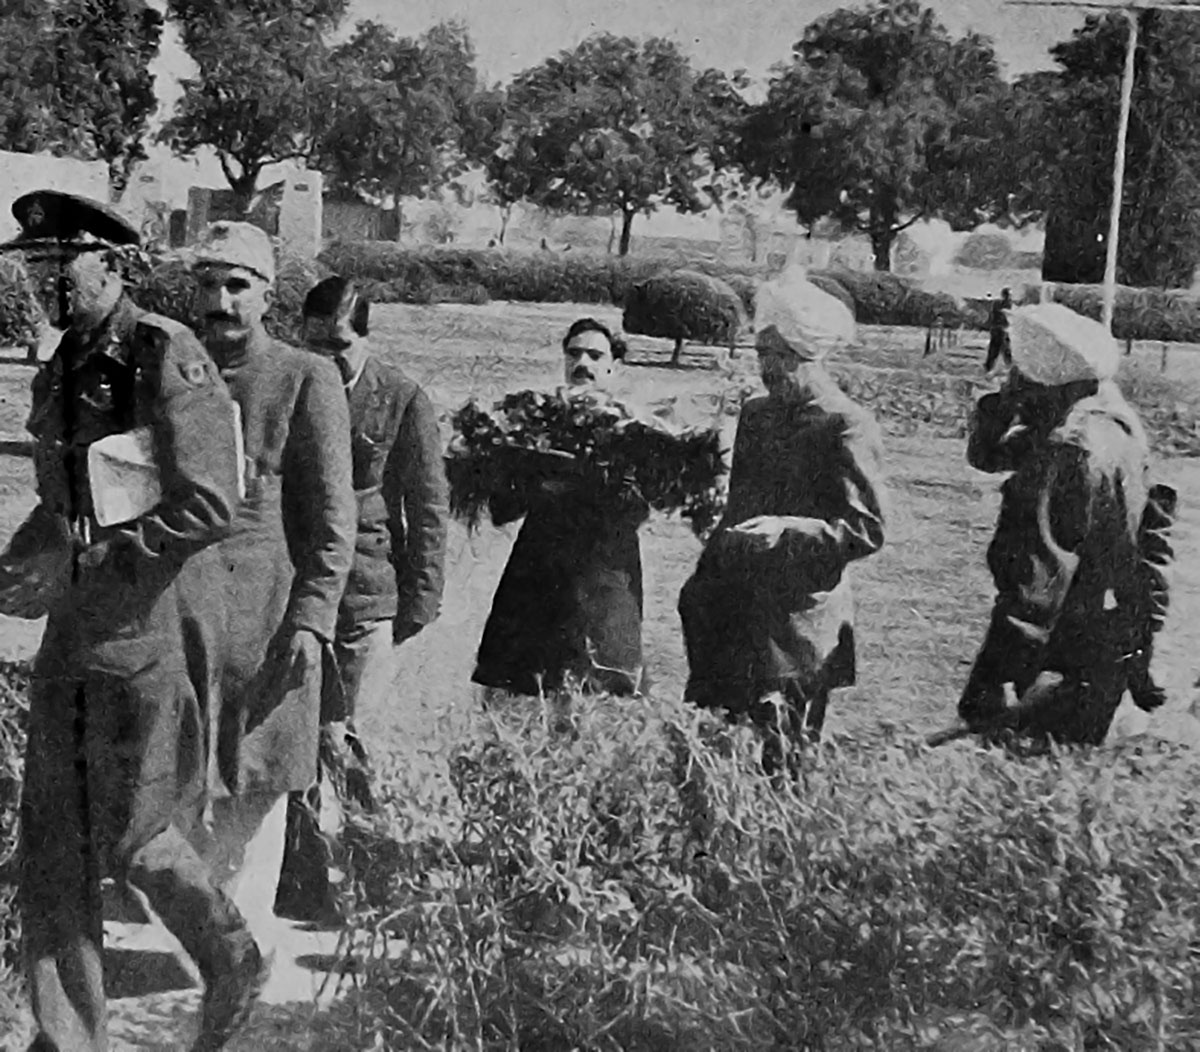 Gandhi’s mortar remains being taken to Kashmir by the then Deputy Prime Minister Bakshi Ghulam Mohammad, a photograph taken at the Delhi airport.